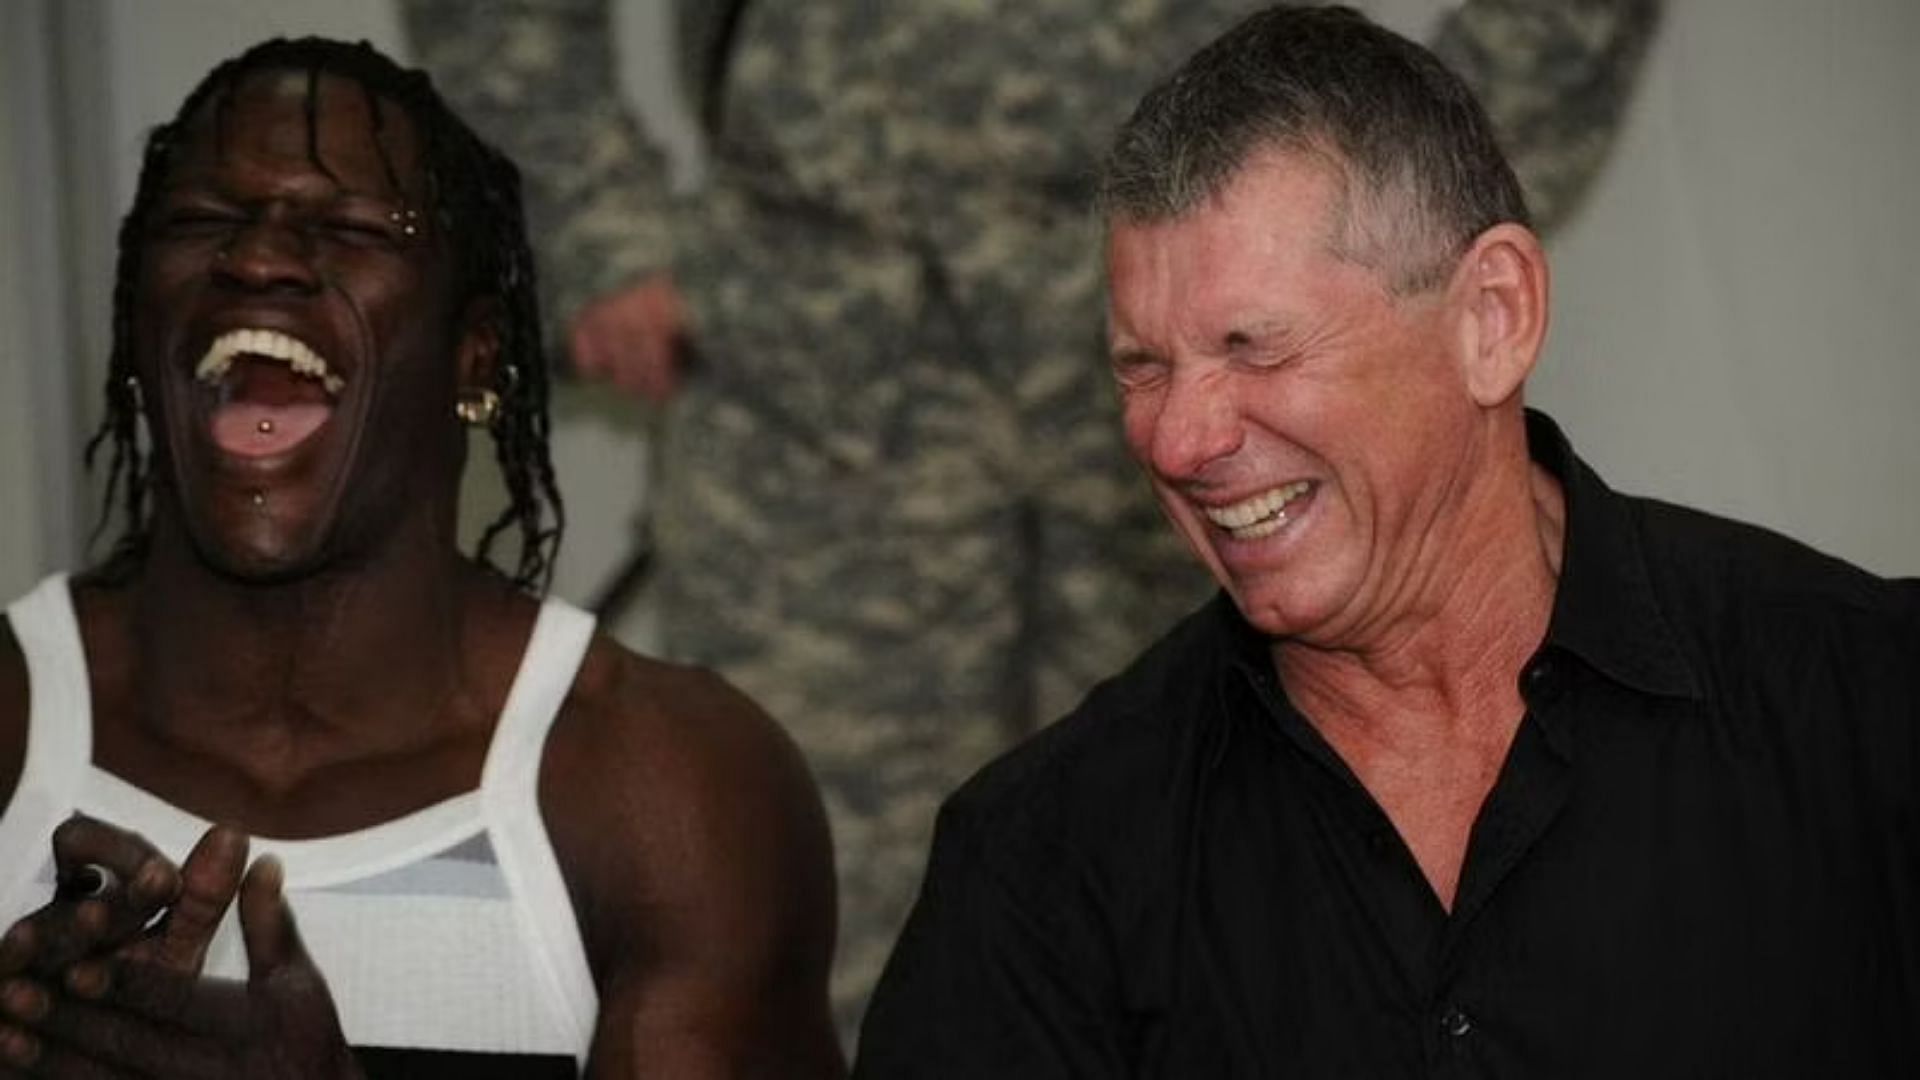 Vince McMahon seems to enjoy being around R-Truth